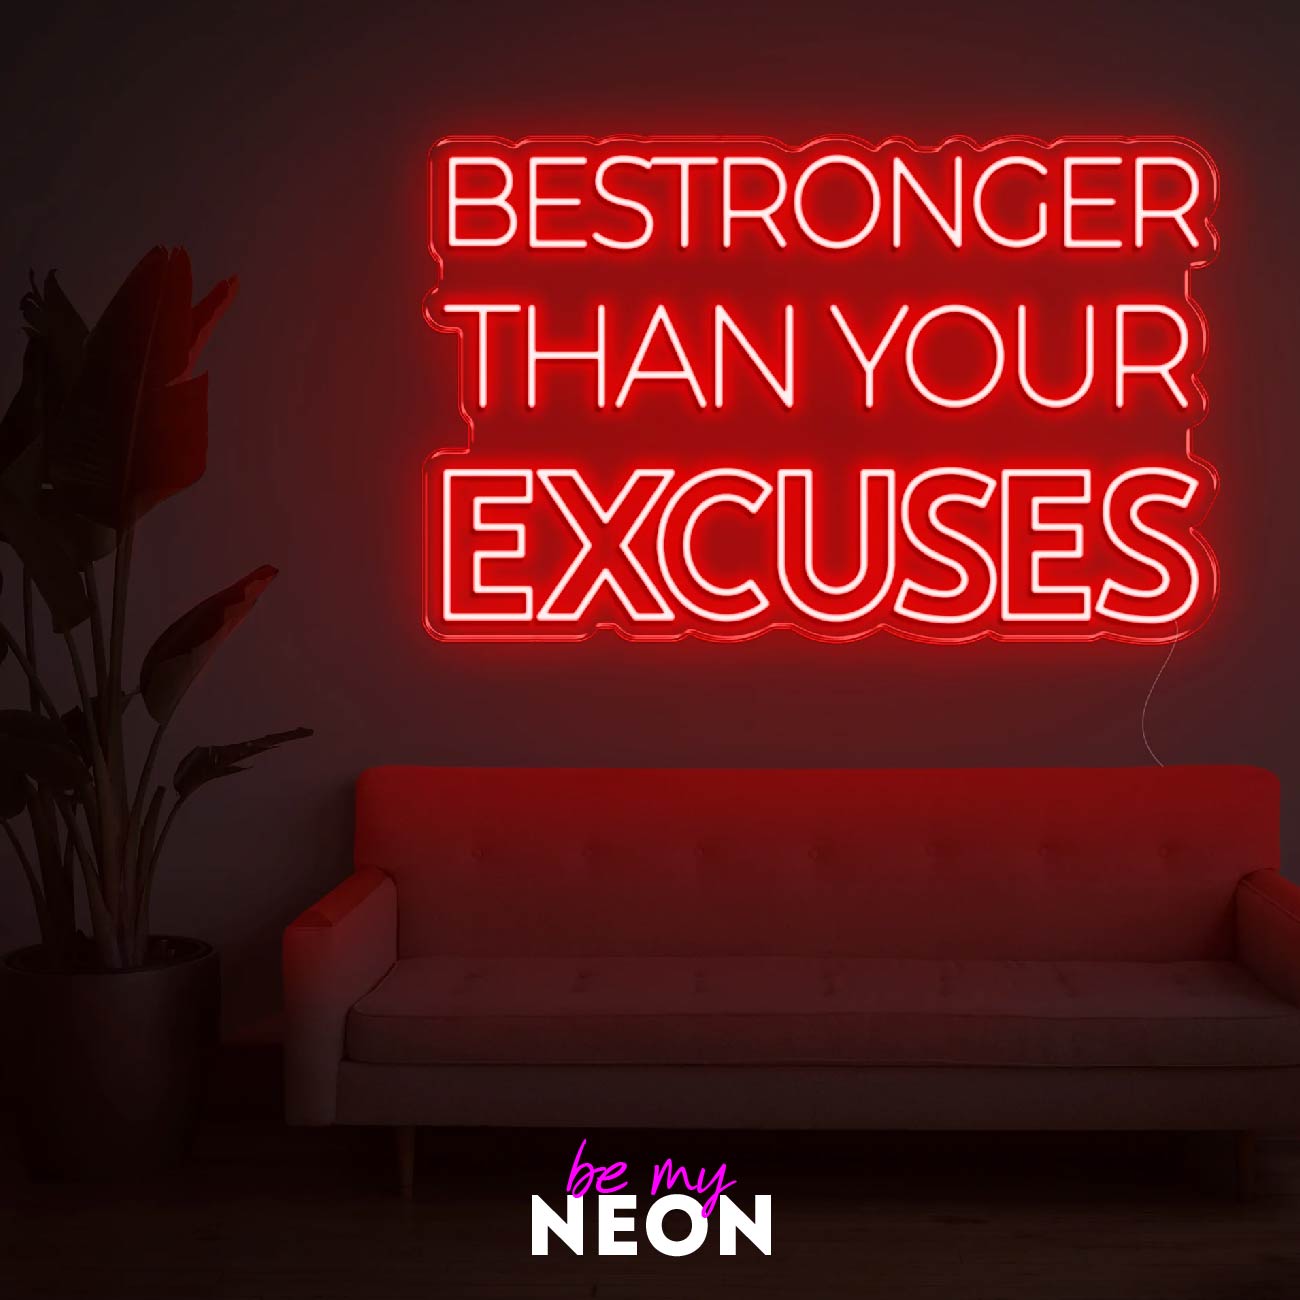 "Be stronger than your excuses" LED Neonschild